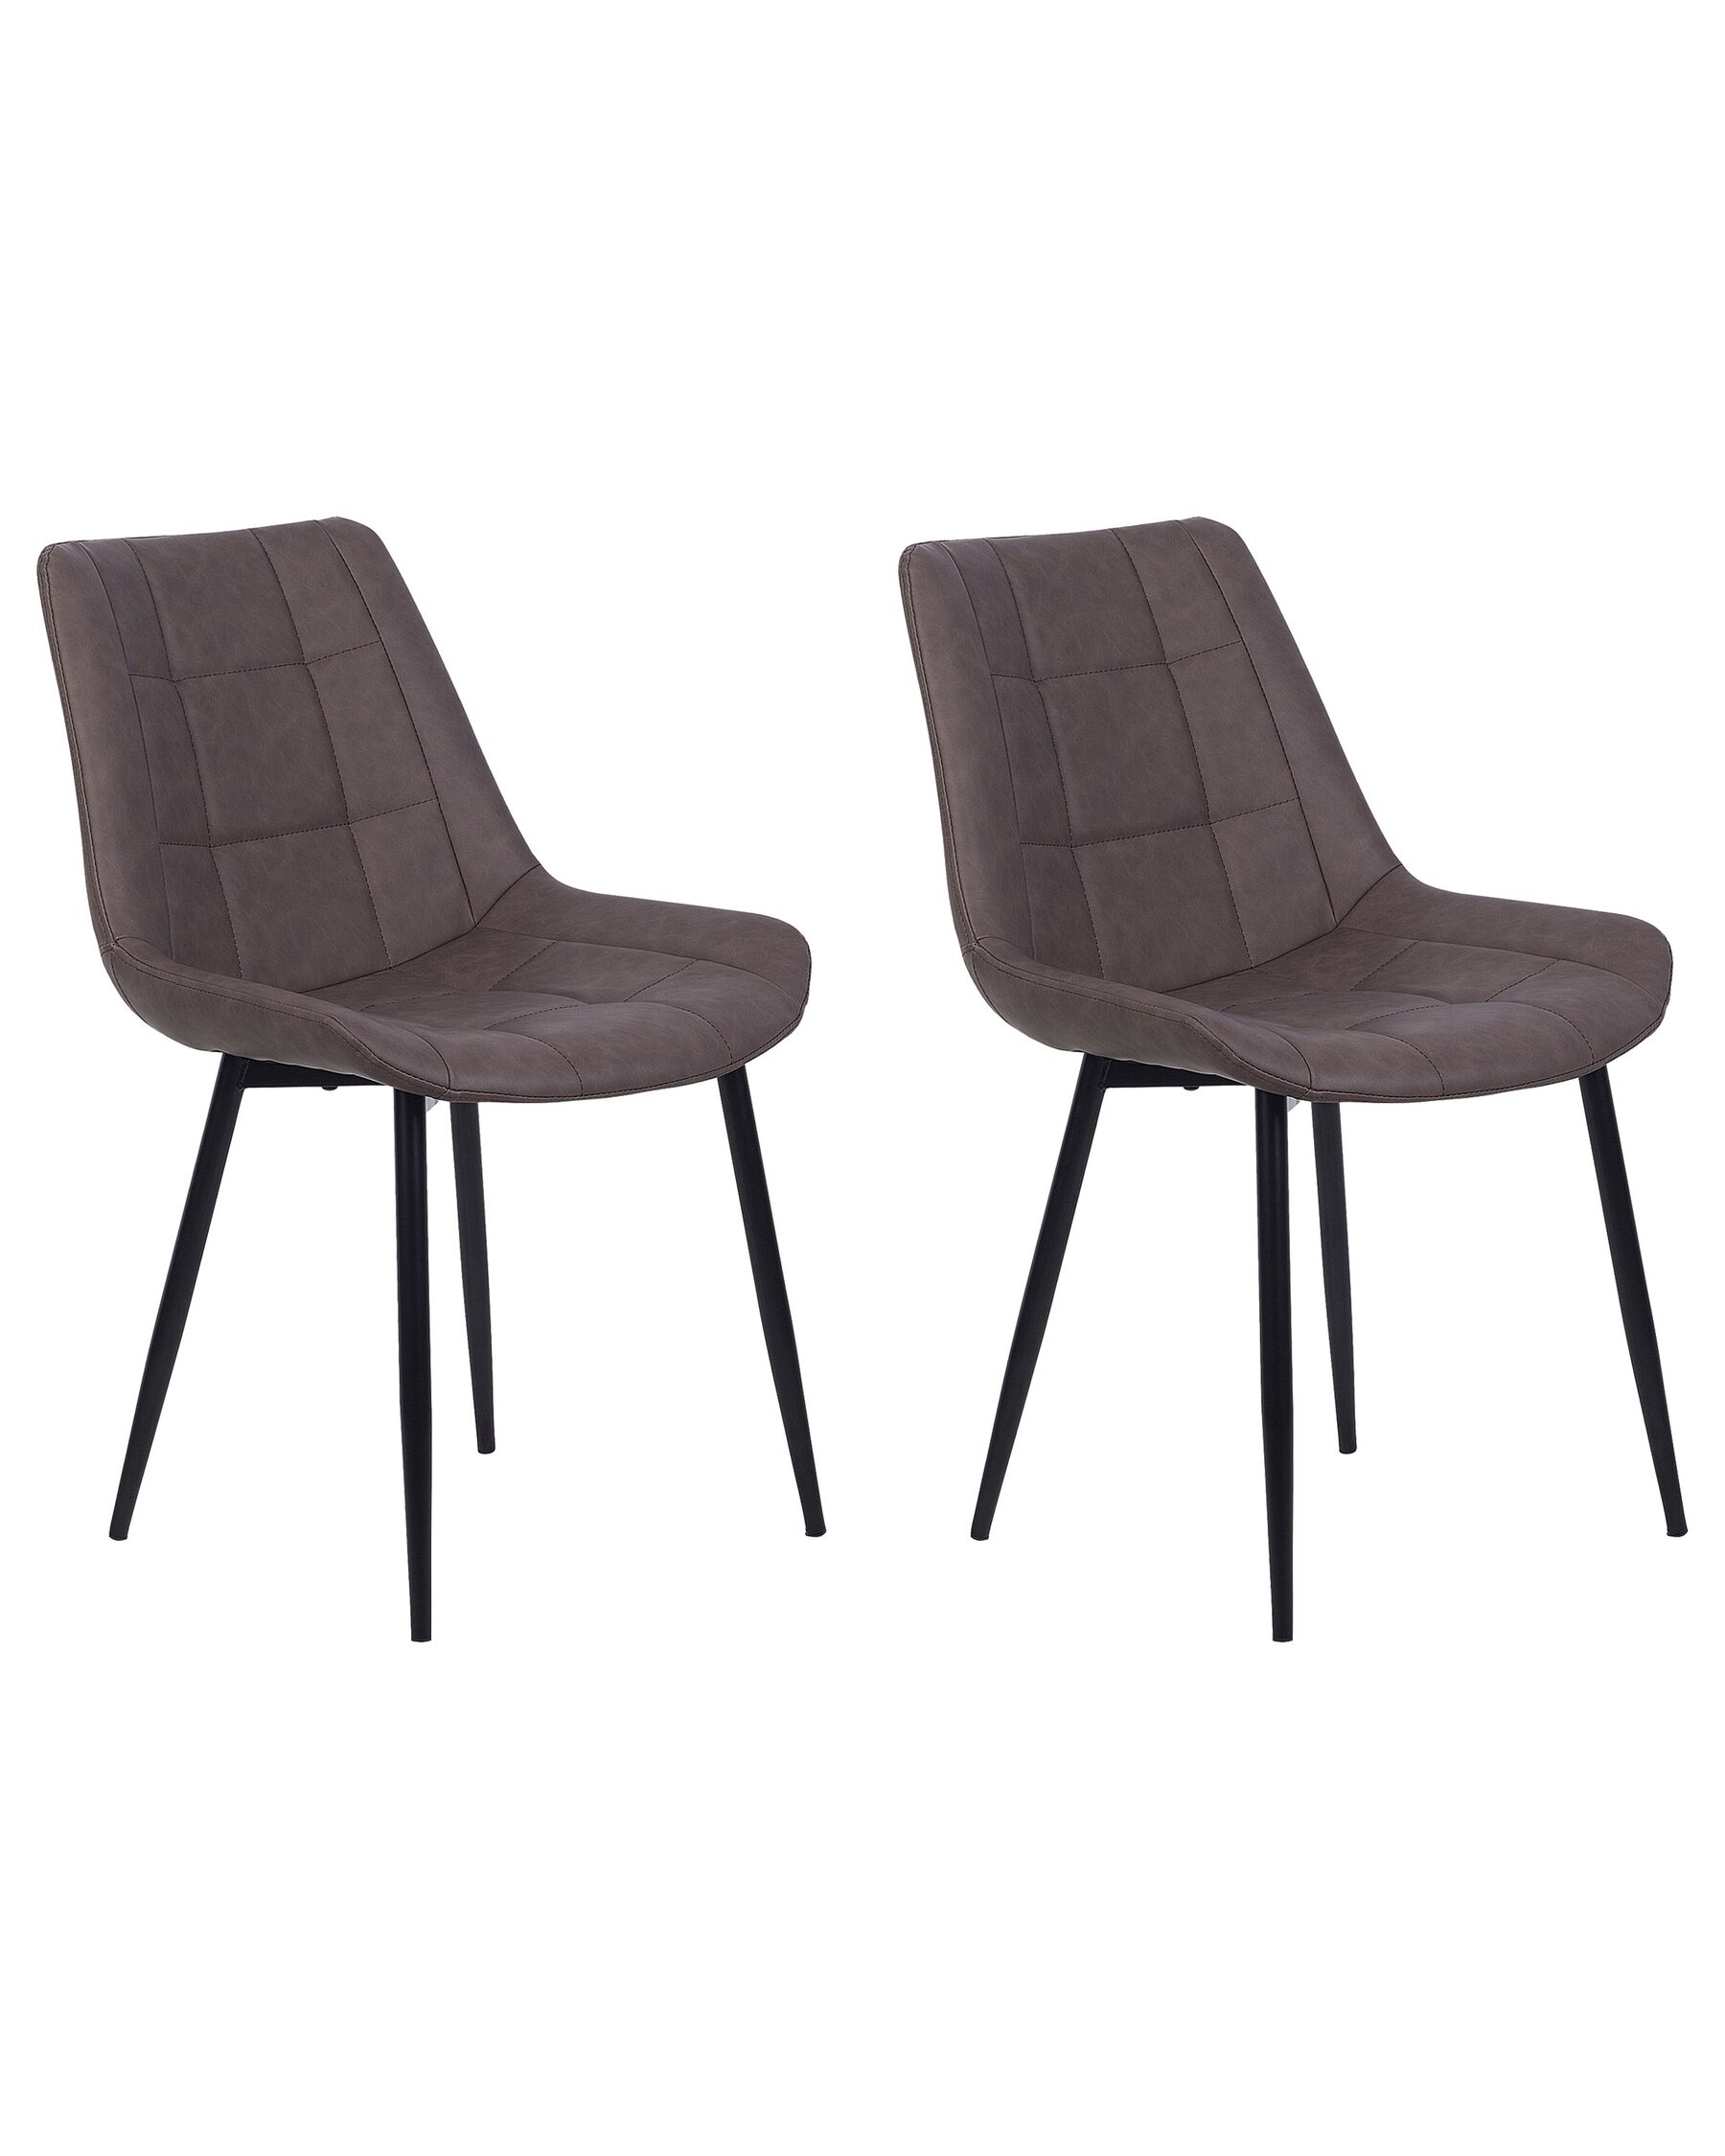 Set of 2 Faux Leather Dining Chairs Brown MELROSE II_716691